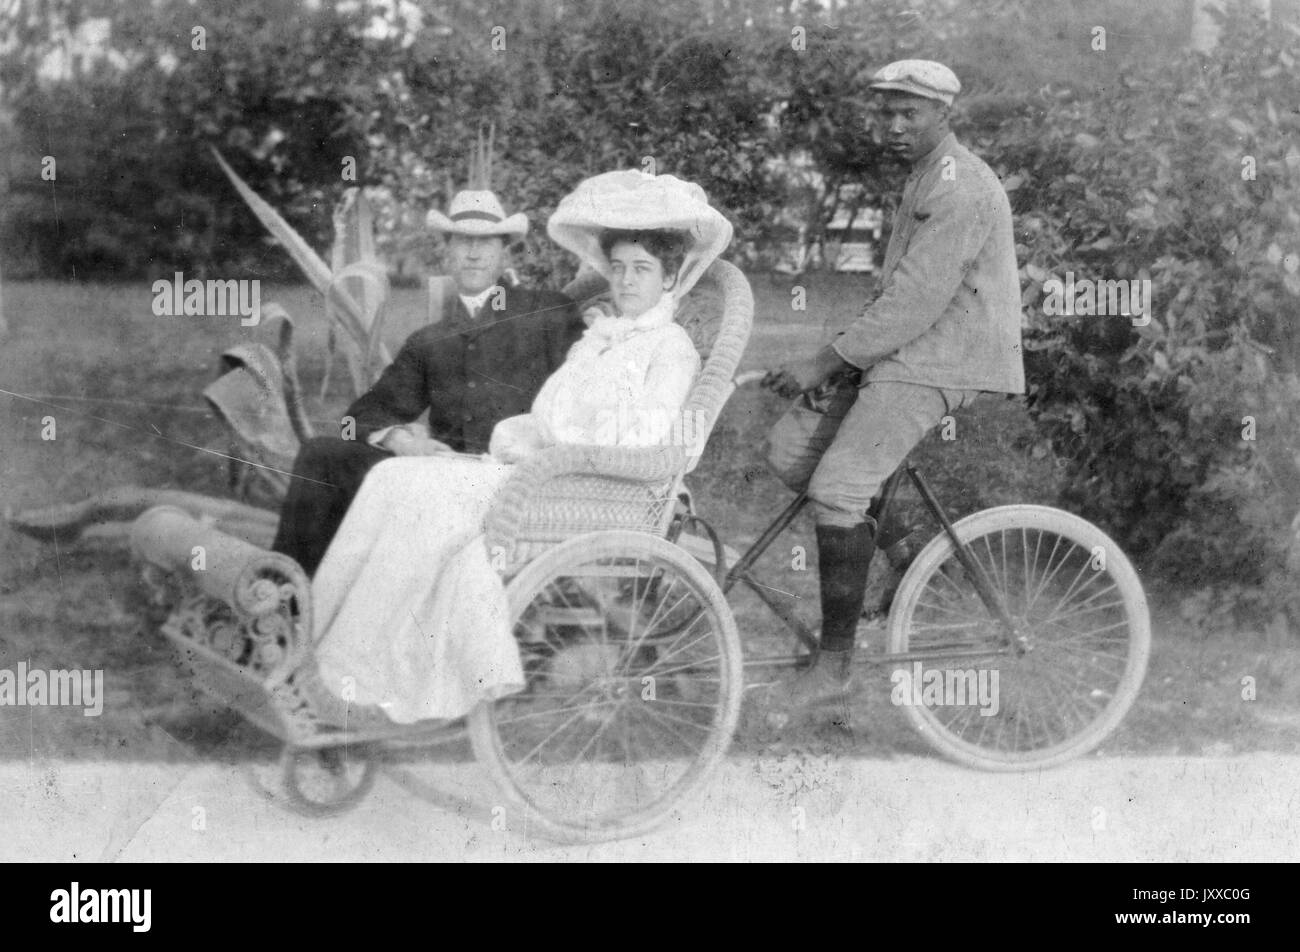 African American man bicycling carriage carrying white man and white woman, African American man wearing dark suit with cap, white woman wearing light dress with elaborate hat, white male wearing dark button down shirt, dark pants and hat, standing outdoors in front of vegetation, neutral expressions, 1910. Stock Photo